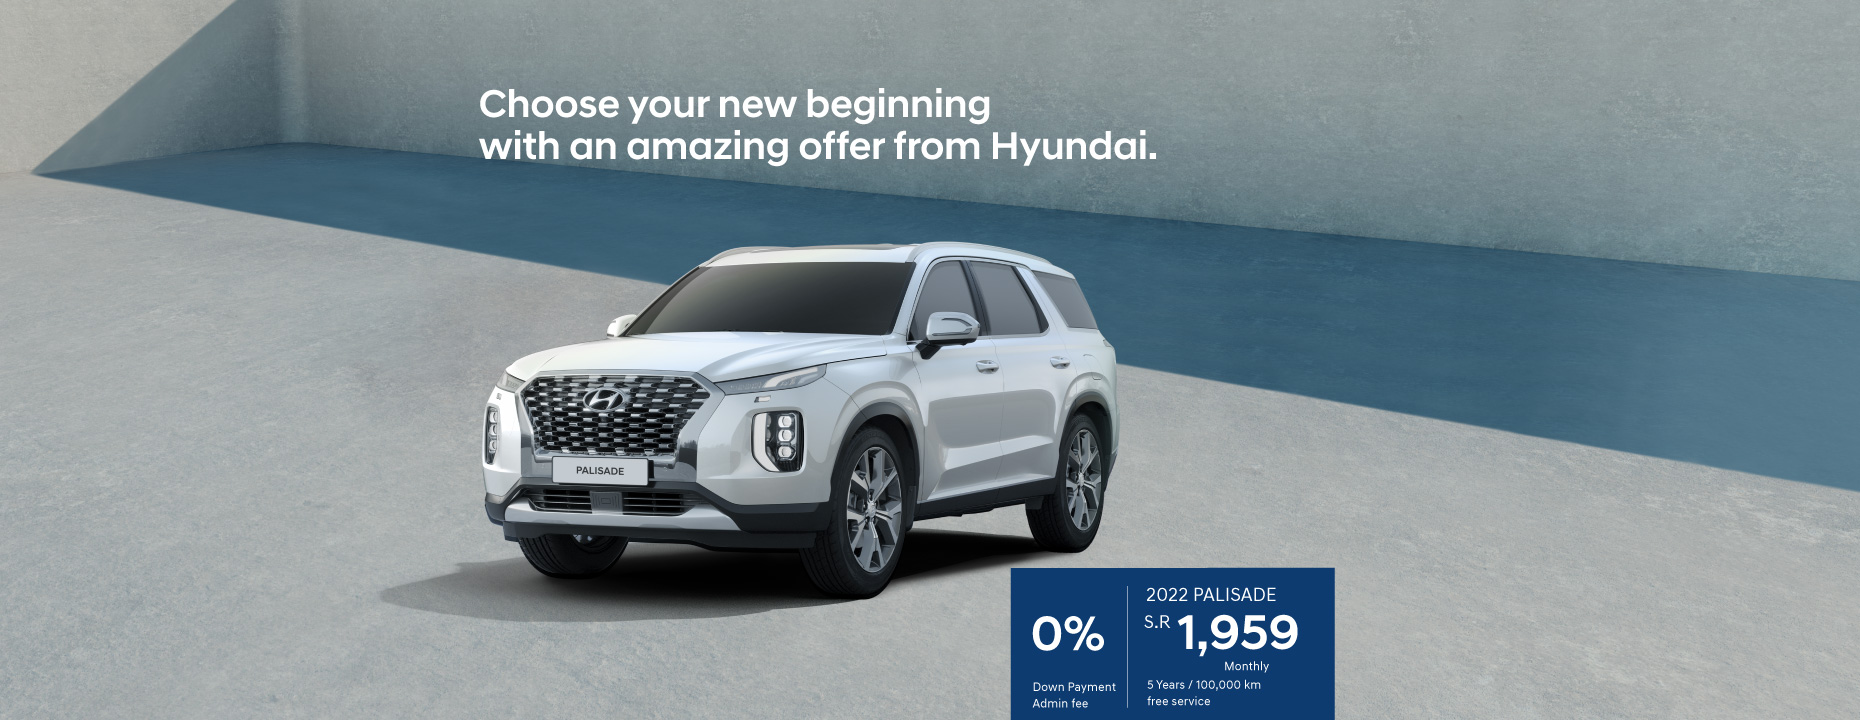 Choose your new beginning with an amazing offer from Hyundai.